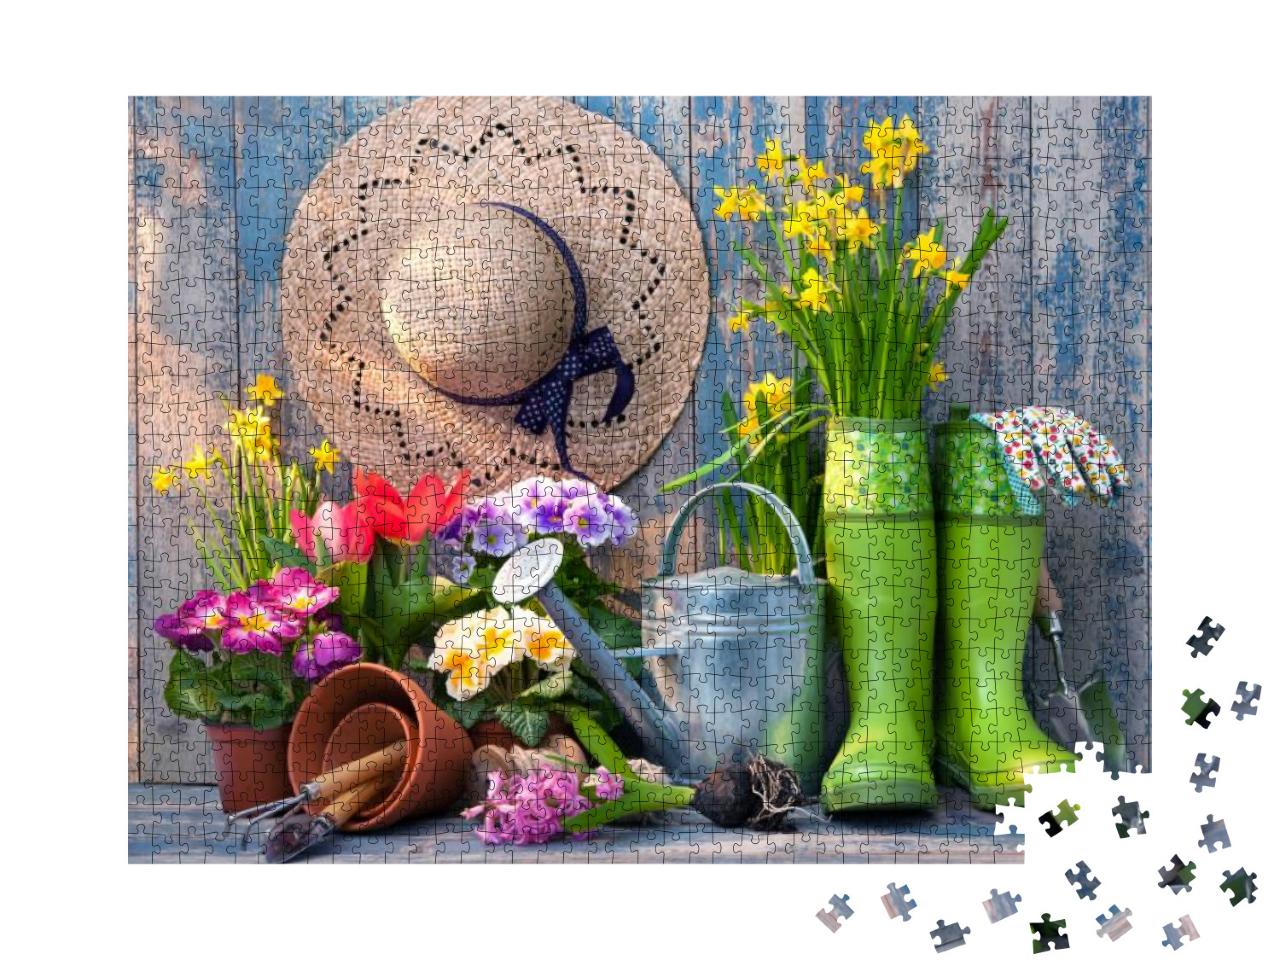 Gardening Tools & Flowers on the Terrace in the Garden... Jigsaw Puzzle with 1000 pieces